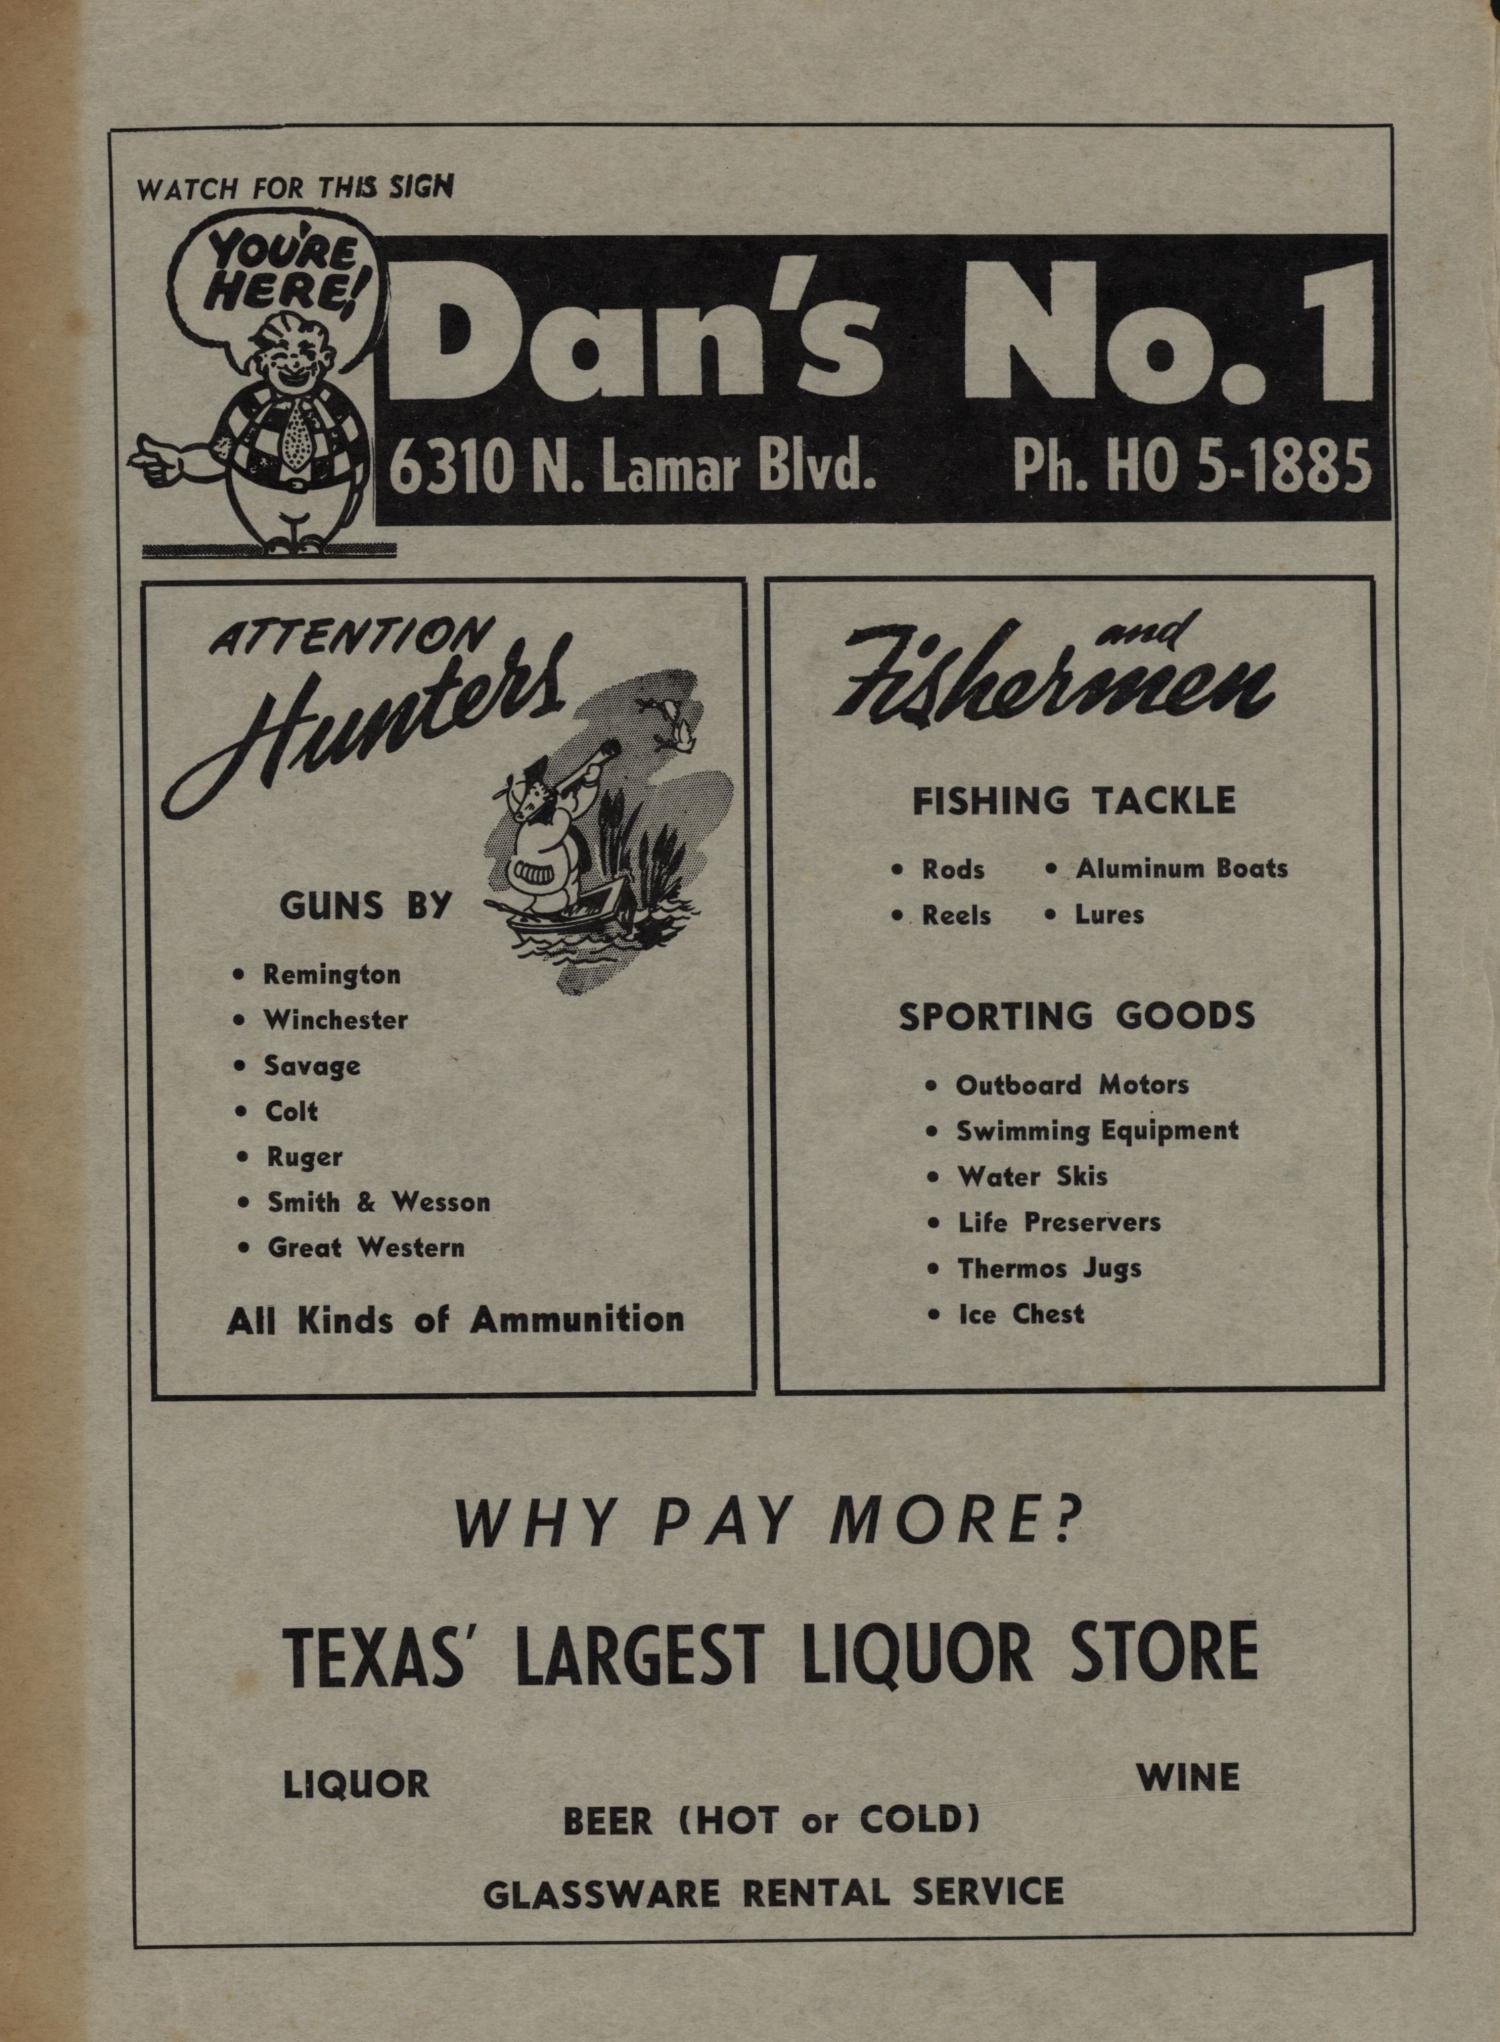 1957 Travis County Rural Directory
                                                
                                                    Front Inside
                                                